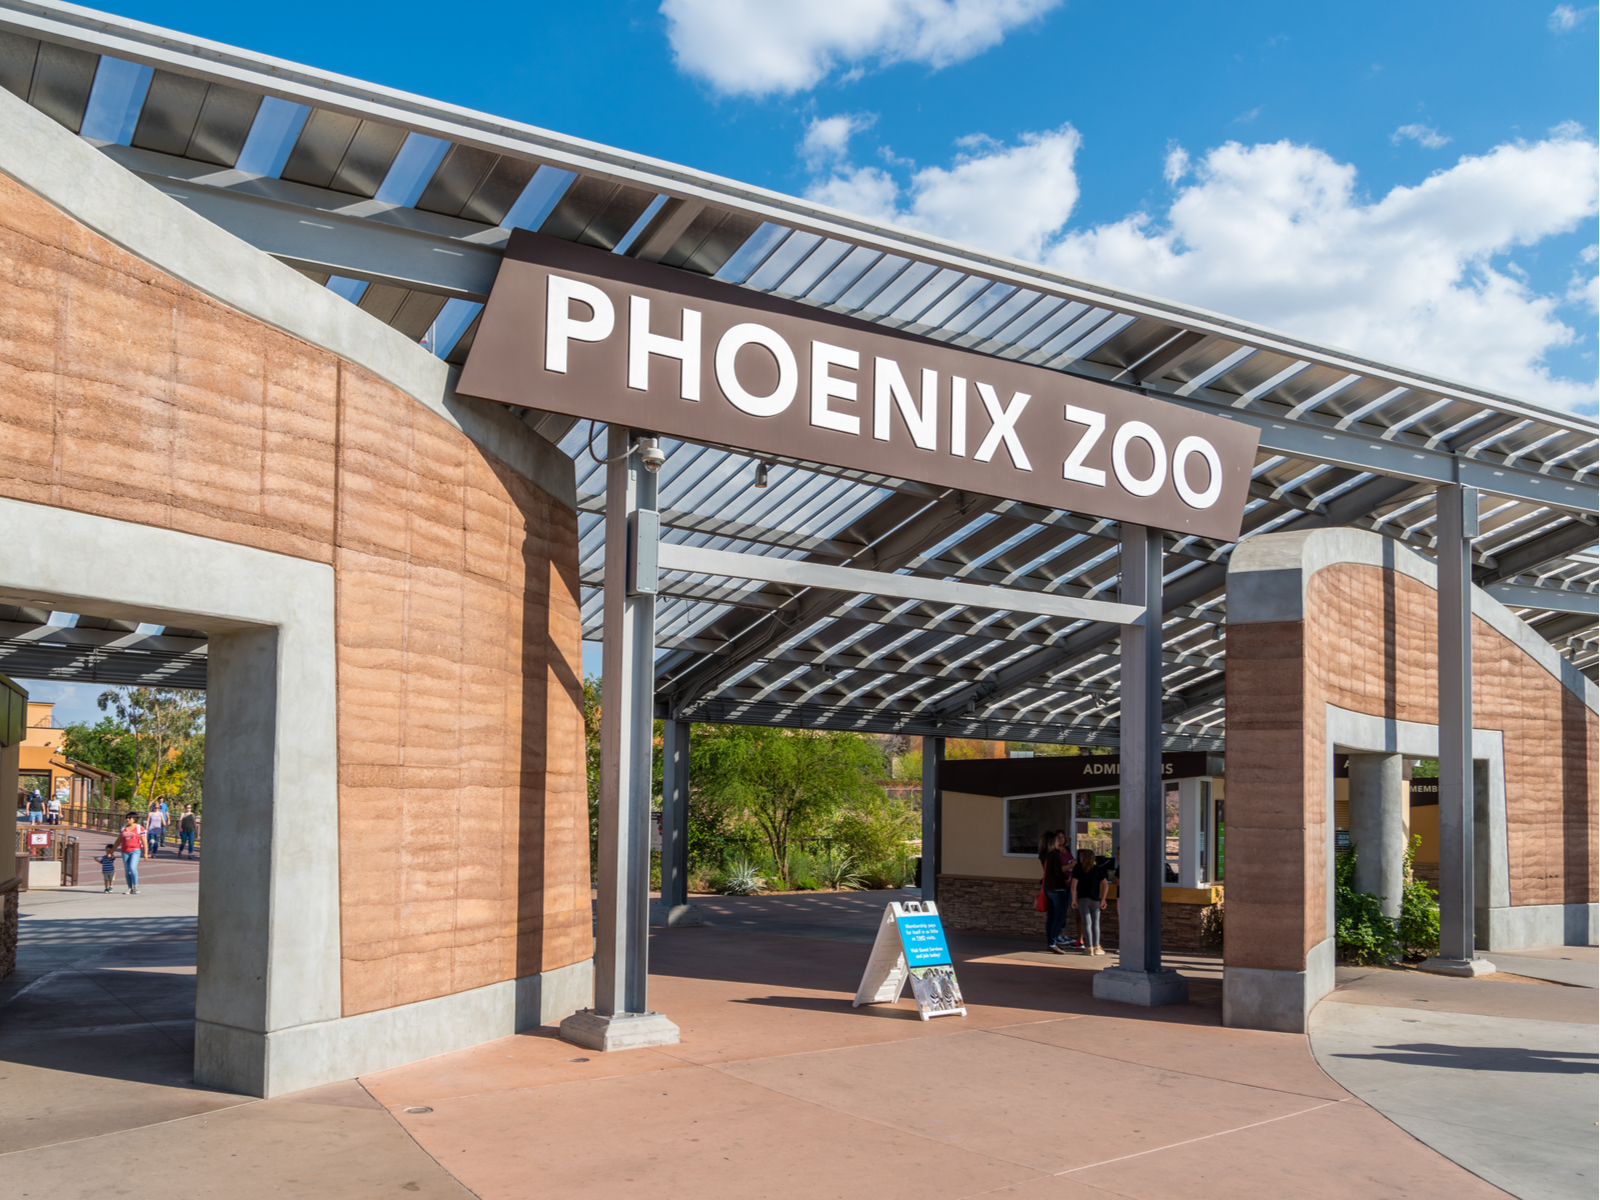 Entrance to the Phoenix Zoo, one of the best things to do in Phoenix